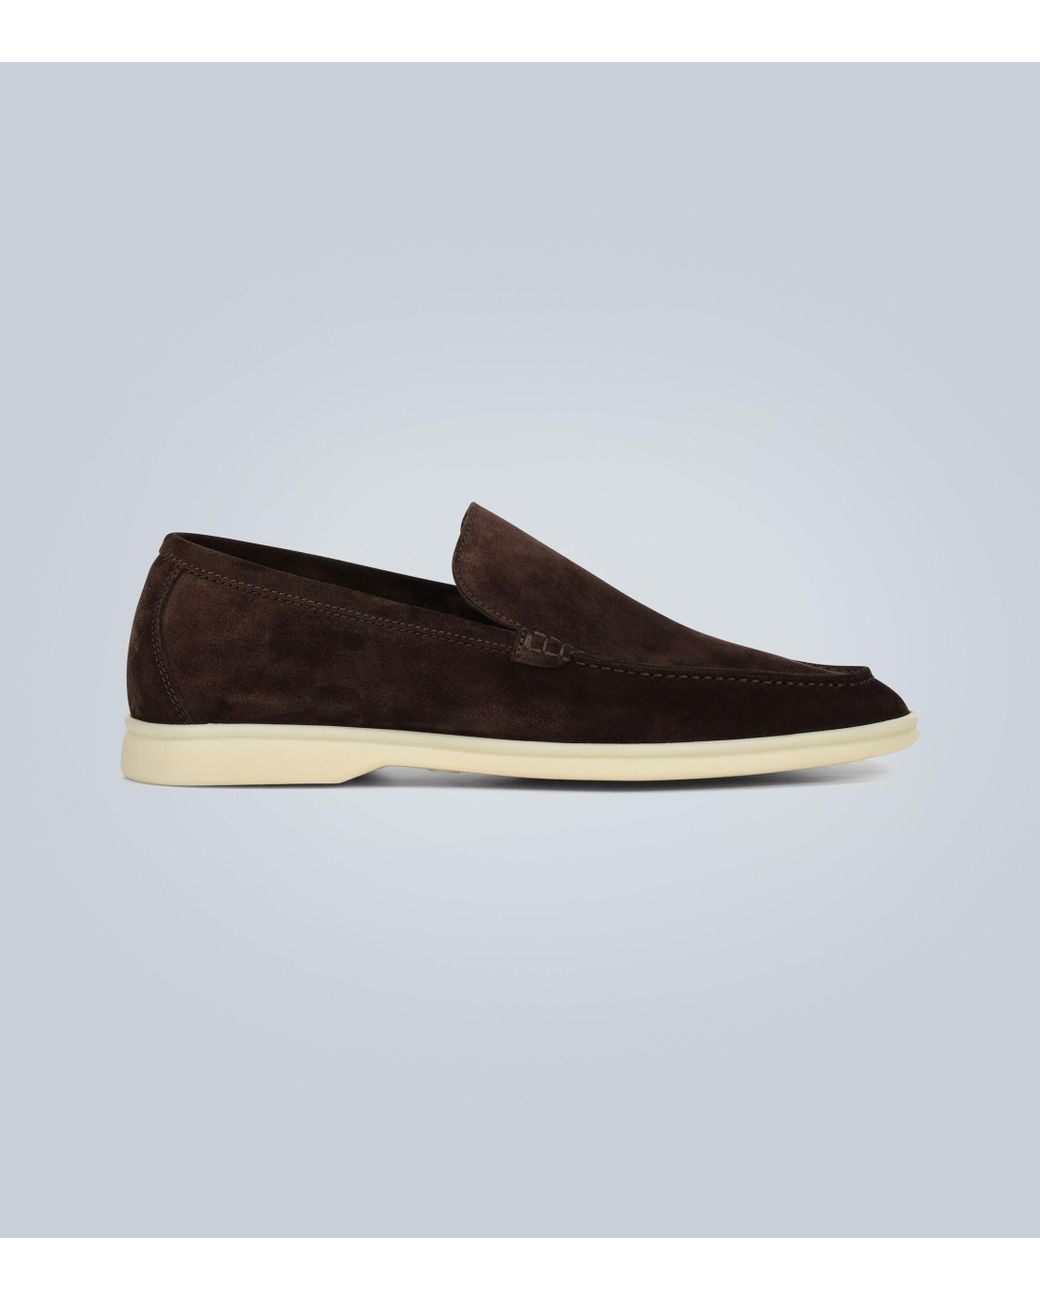 Loro Piana Summer Walk Suede Moccasins in Brown for Men - Lyst